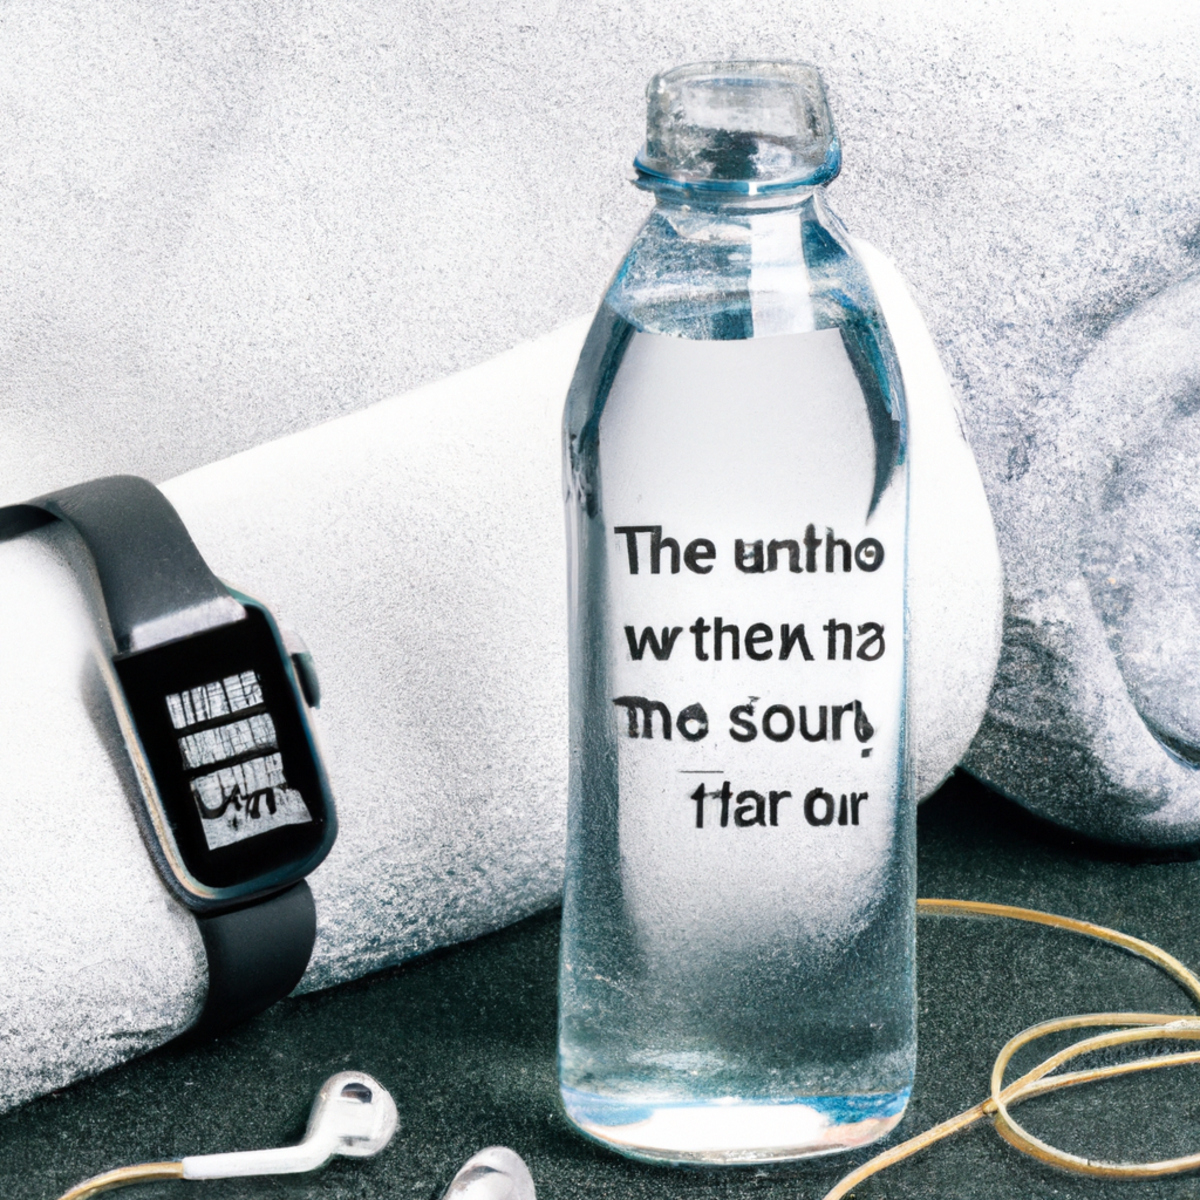 The photo features a sleek fitness tracker watch, a pair of wireless earbuds, and a water bottle placed on a gym towel. The watch, specifically designed for Fitness Apps and Wearables, displays the user's heart rate and step count, while the earbuds are connected to a smartphone displaying a fitness app. The water bottle is labeled with motivational quotes to keep the user hydrated during their workout. The background shows a gym with weights and exercise equipment, emphasizing the importance of incorporating technology into a fitness routine.